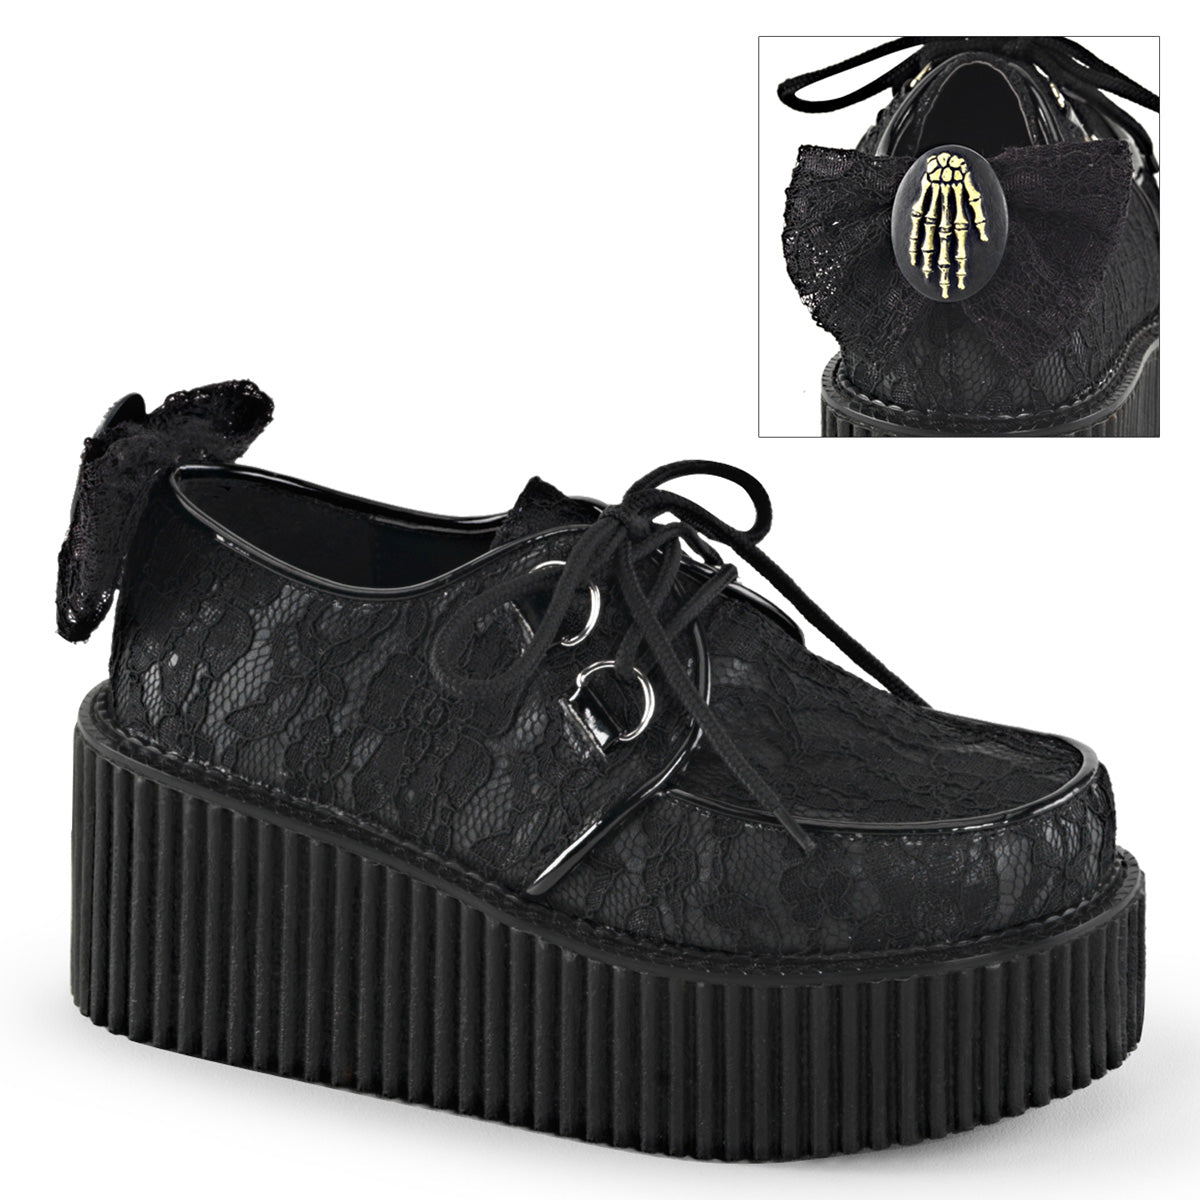 CREEPER-212 Lace Creeper Shoes by Demonia